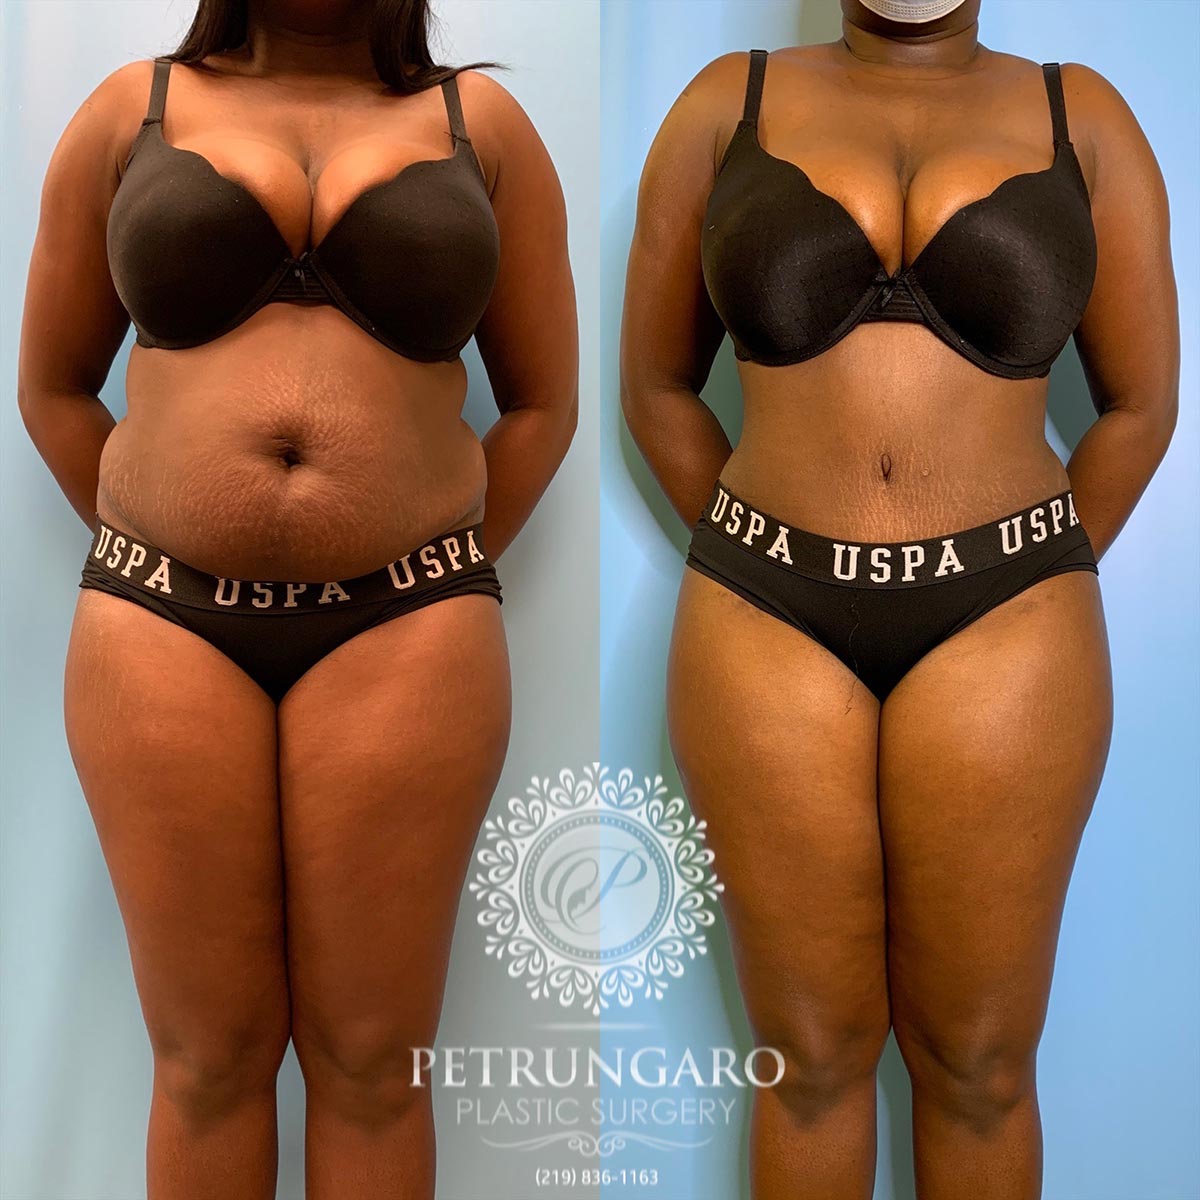 30 year old woman 3 months after tummy tuck with Lipo 360-1